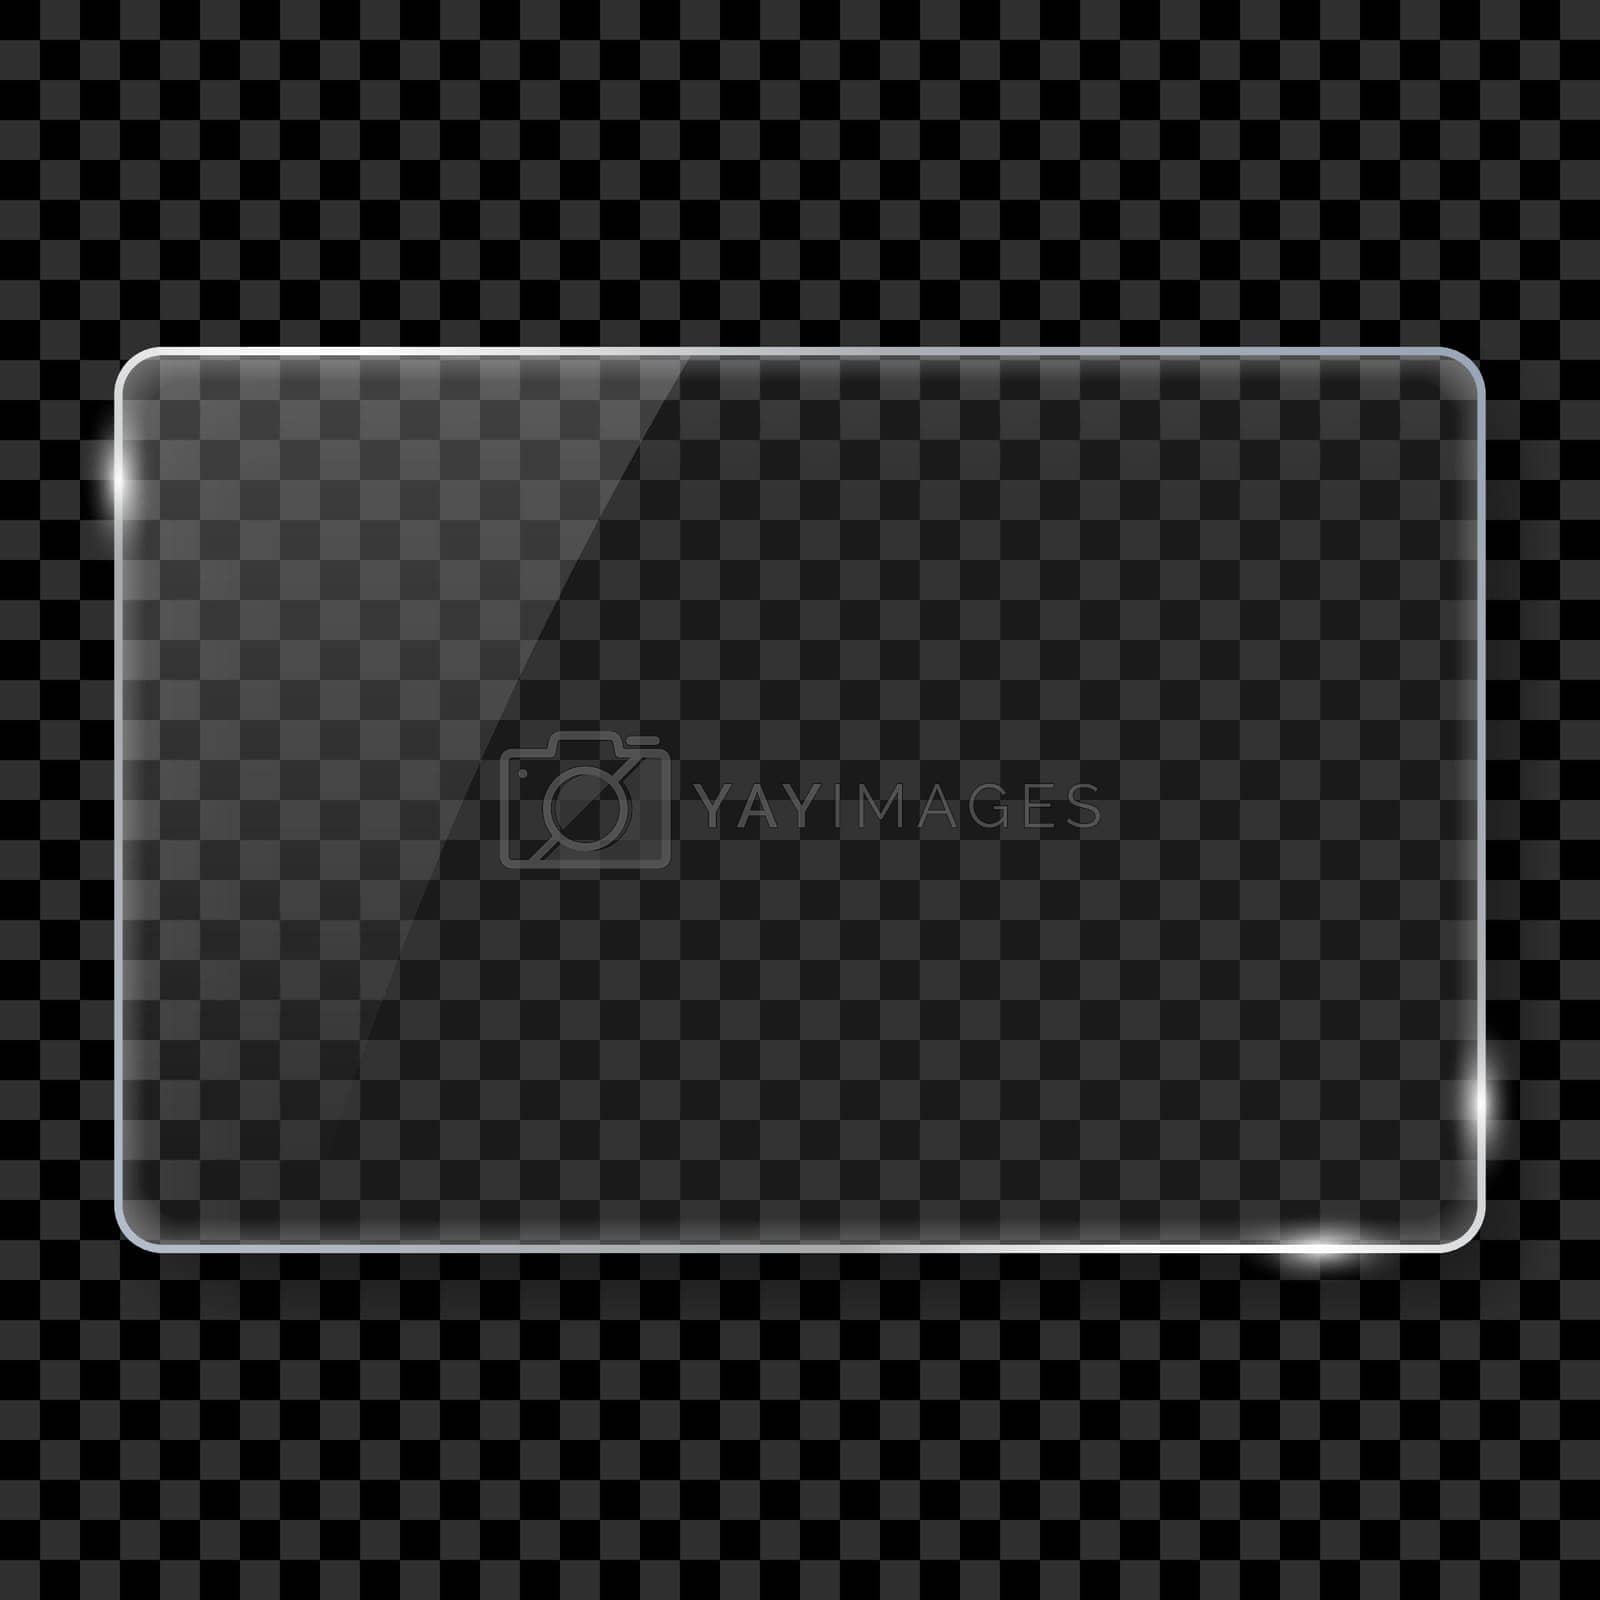 Royalty free image of Realistic Silver Rectangle Frame Glass. Glass Plate on Dark Transparent Background. Clear Shiny Frame Glass Texture with Glossy Effect for Decoration and Covering. Isolated Vector Illustration by Toxa2x2